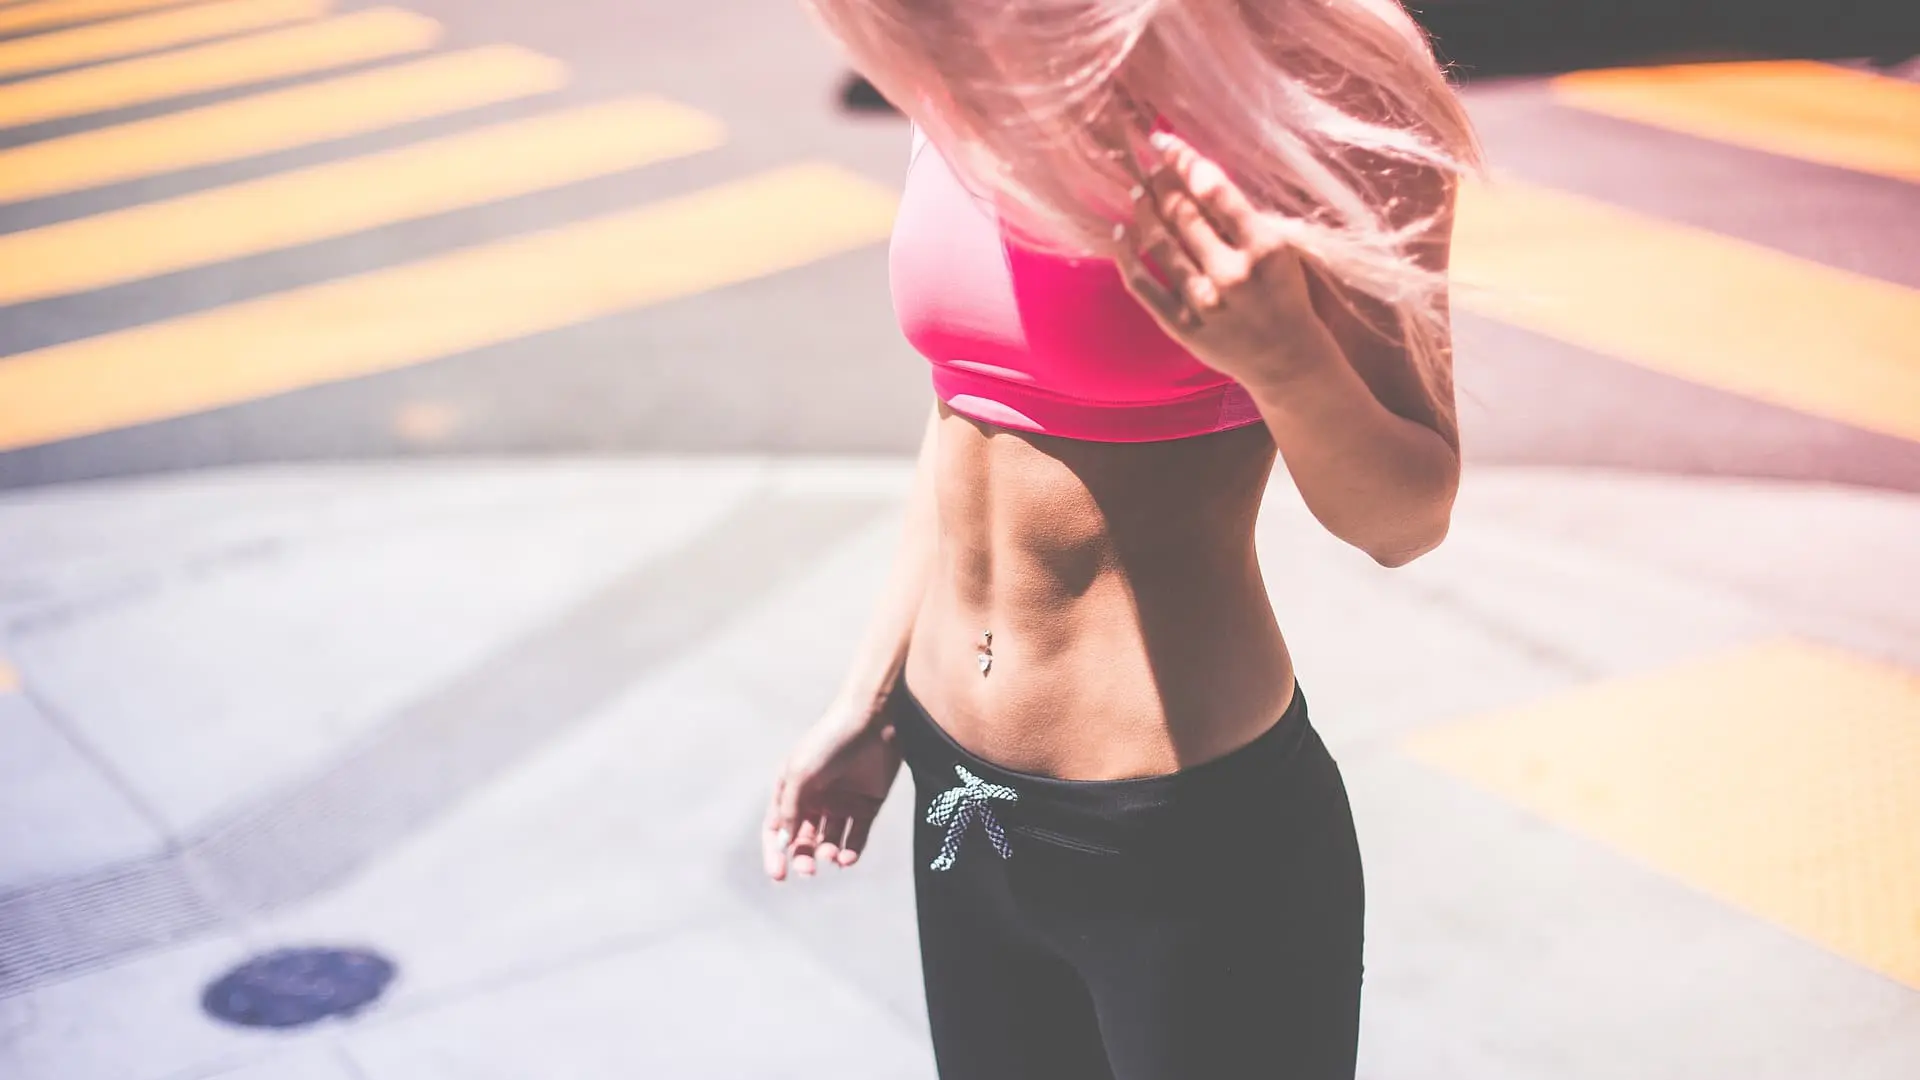 6 Best Ab Exercises That You Need to Know